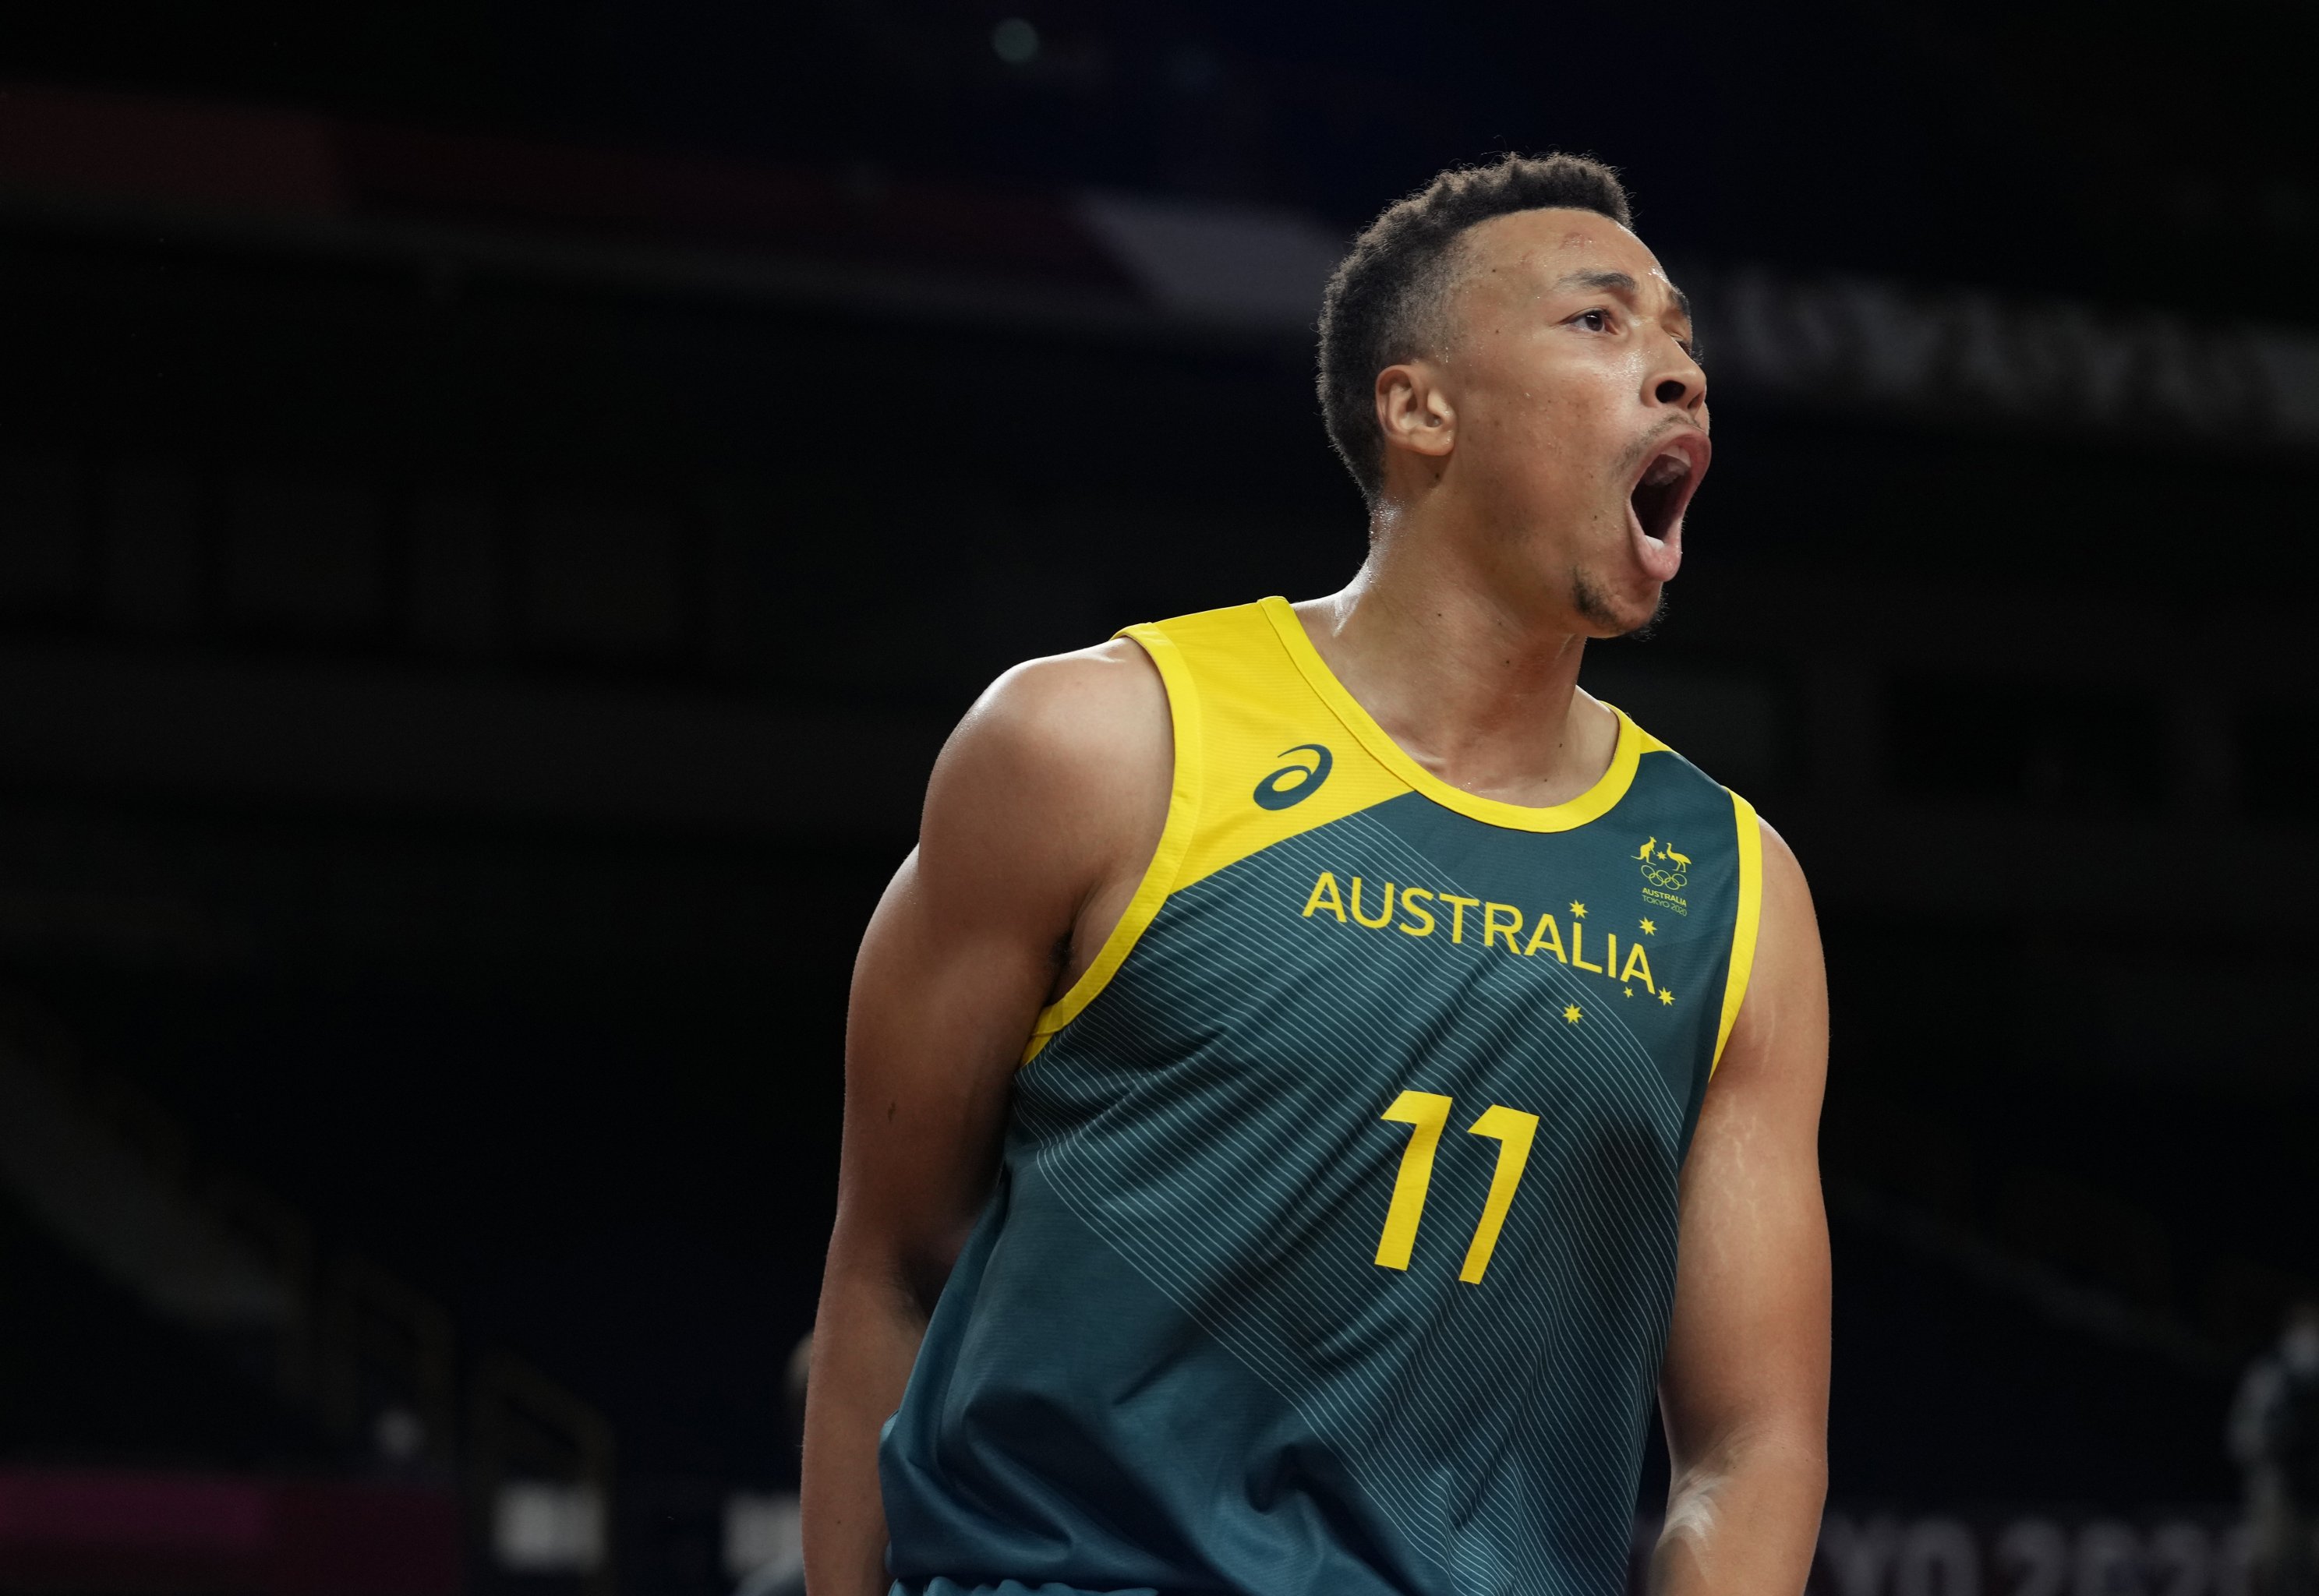 Yes, Ben Simmons is now the NBA's most underrated player: Aussie